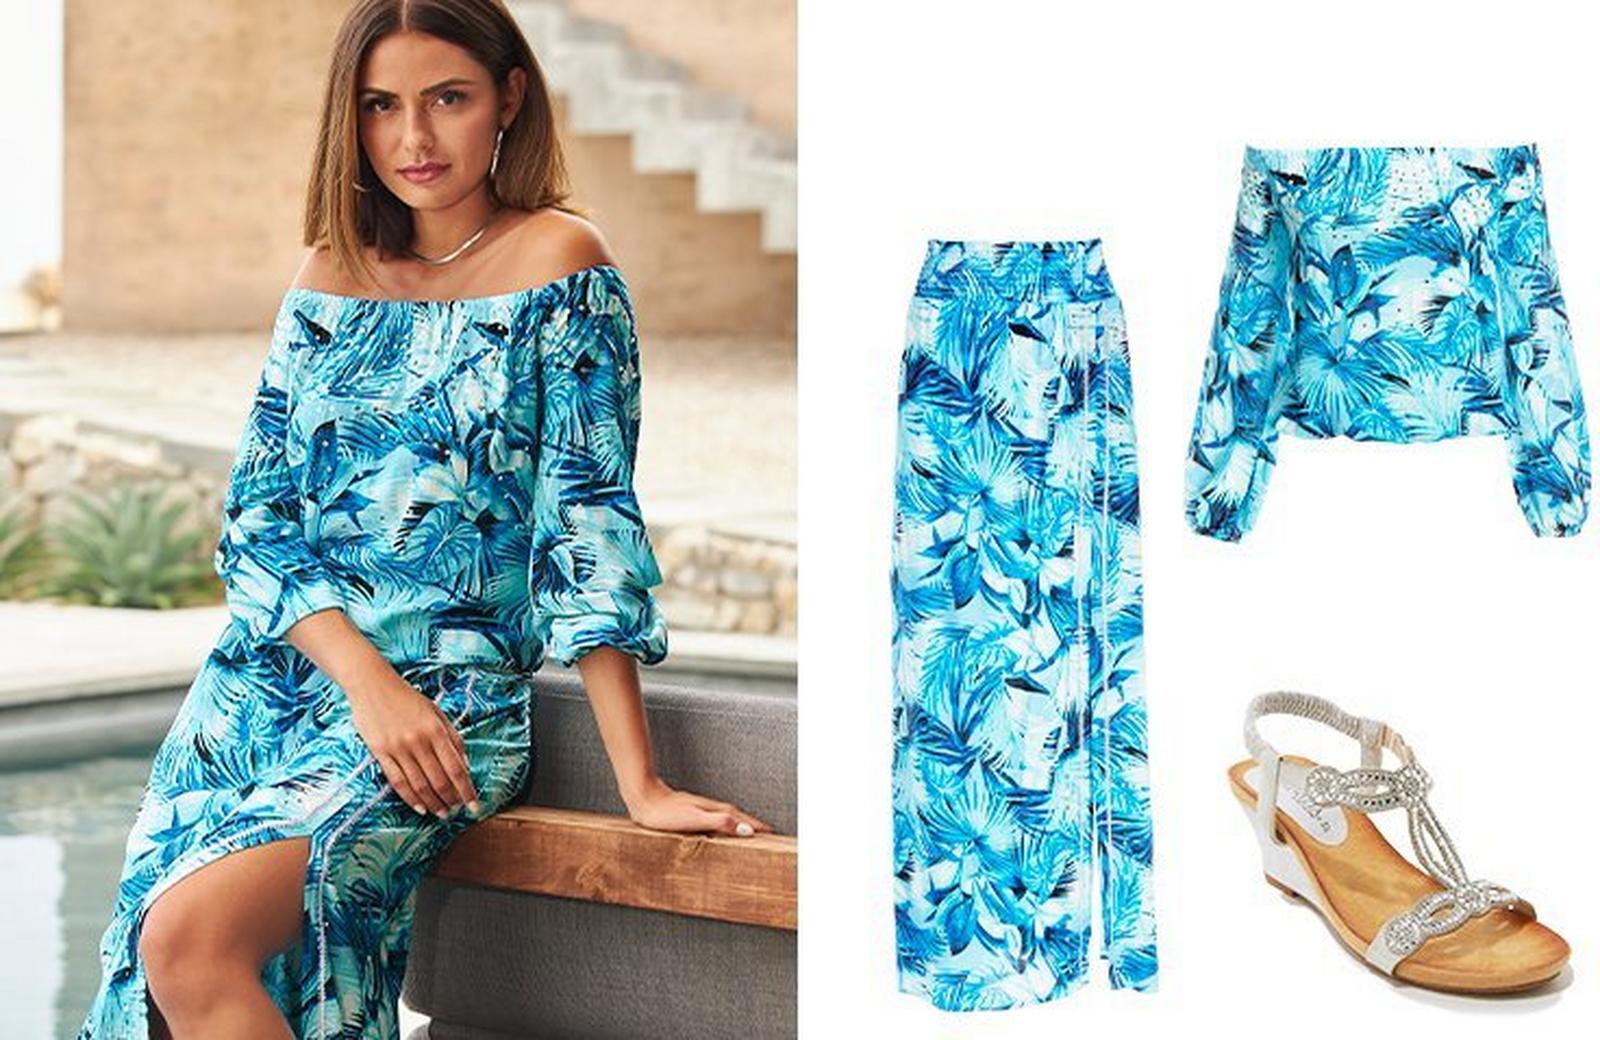 left model wearing a blue palm print off-the-shoulder long-sleeve top and matching maxi skirt. right panel: blue palm print maxi skirt, blue palm print off-the-shoulder long-sleeve top, and silver crystal embellished sandals.